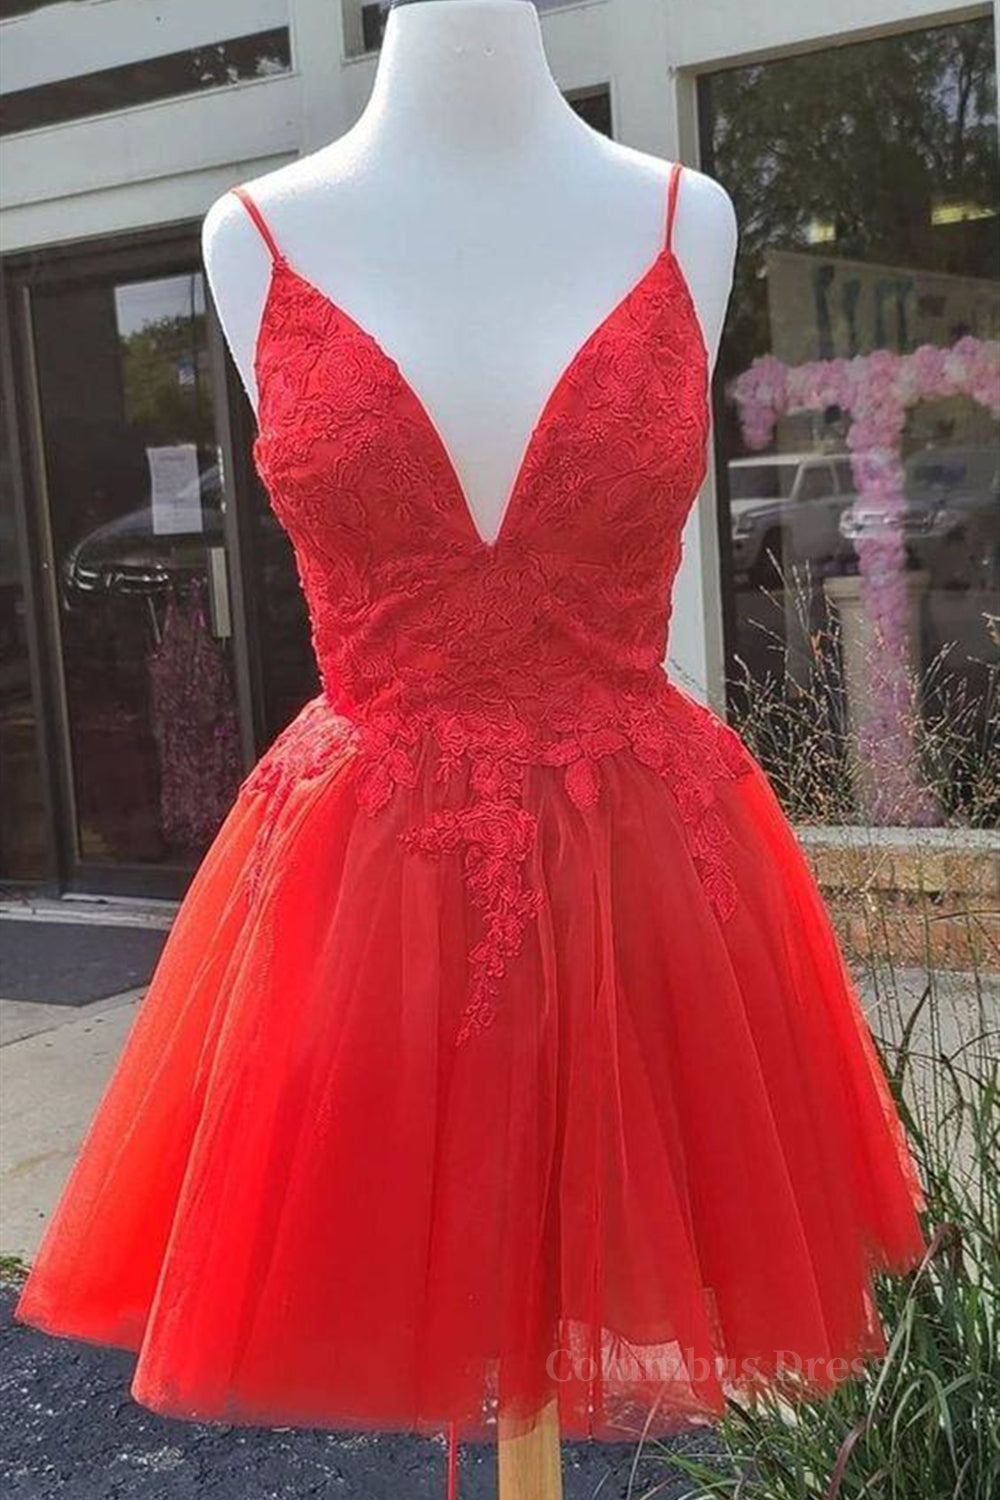 A Line V Neck Red Lace Short Corset Prom Dress, Red Lace Corset Homecoming Dress outfit, Wedding Flower